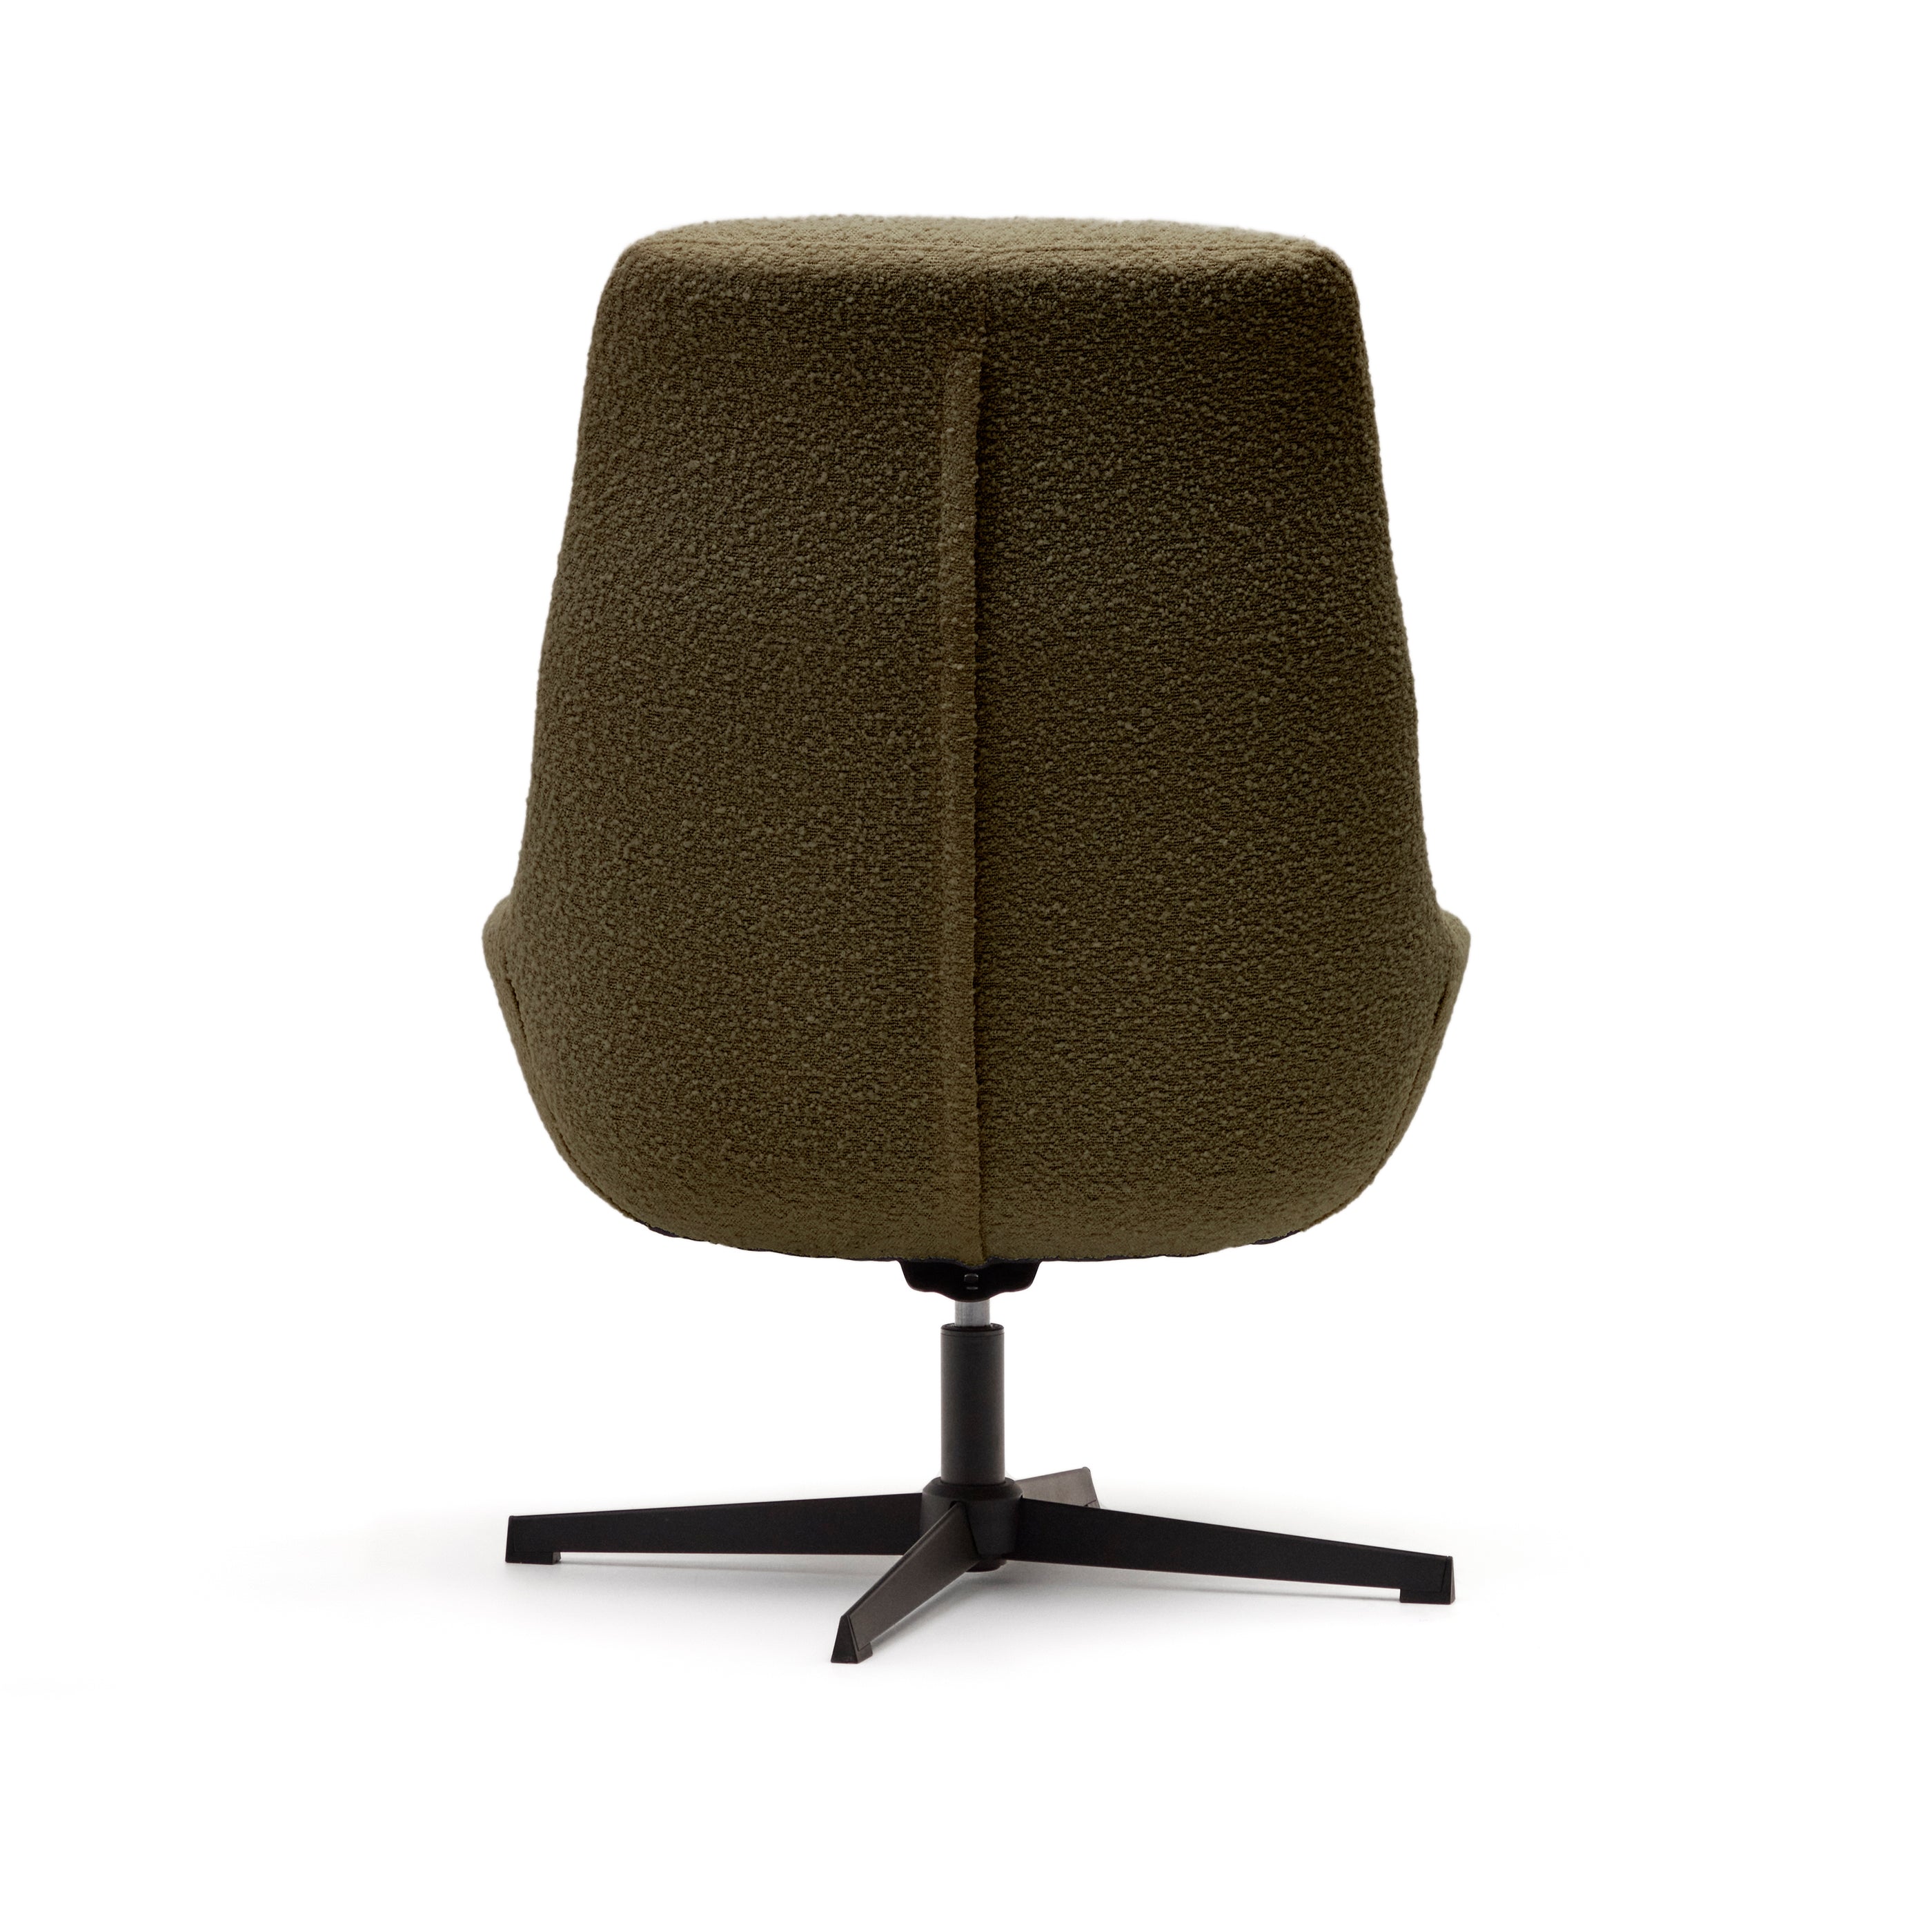 Celida swivel armchair in dark green shearling and steel with black finish